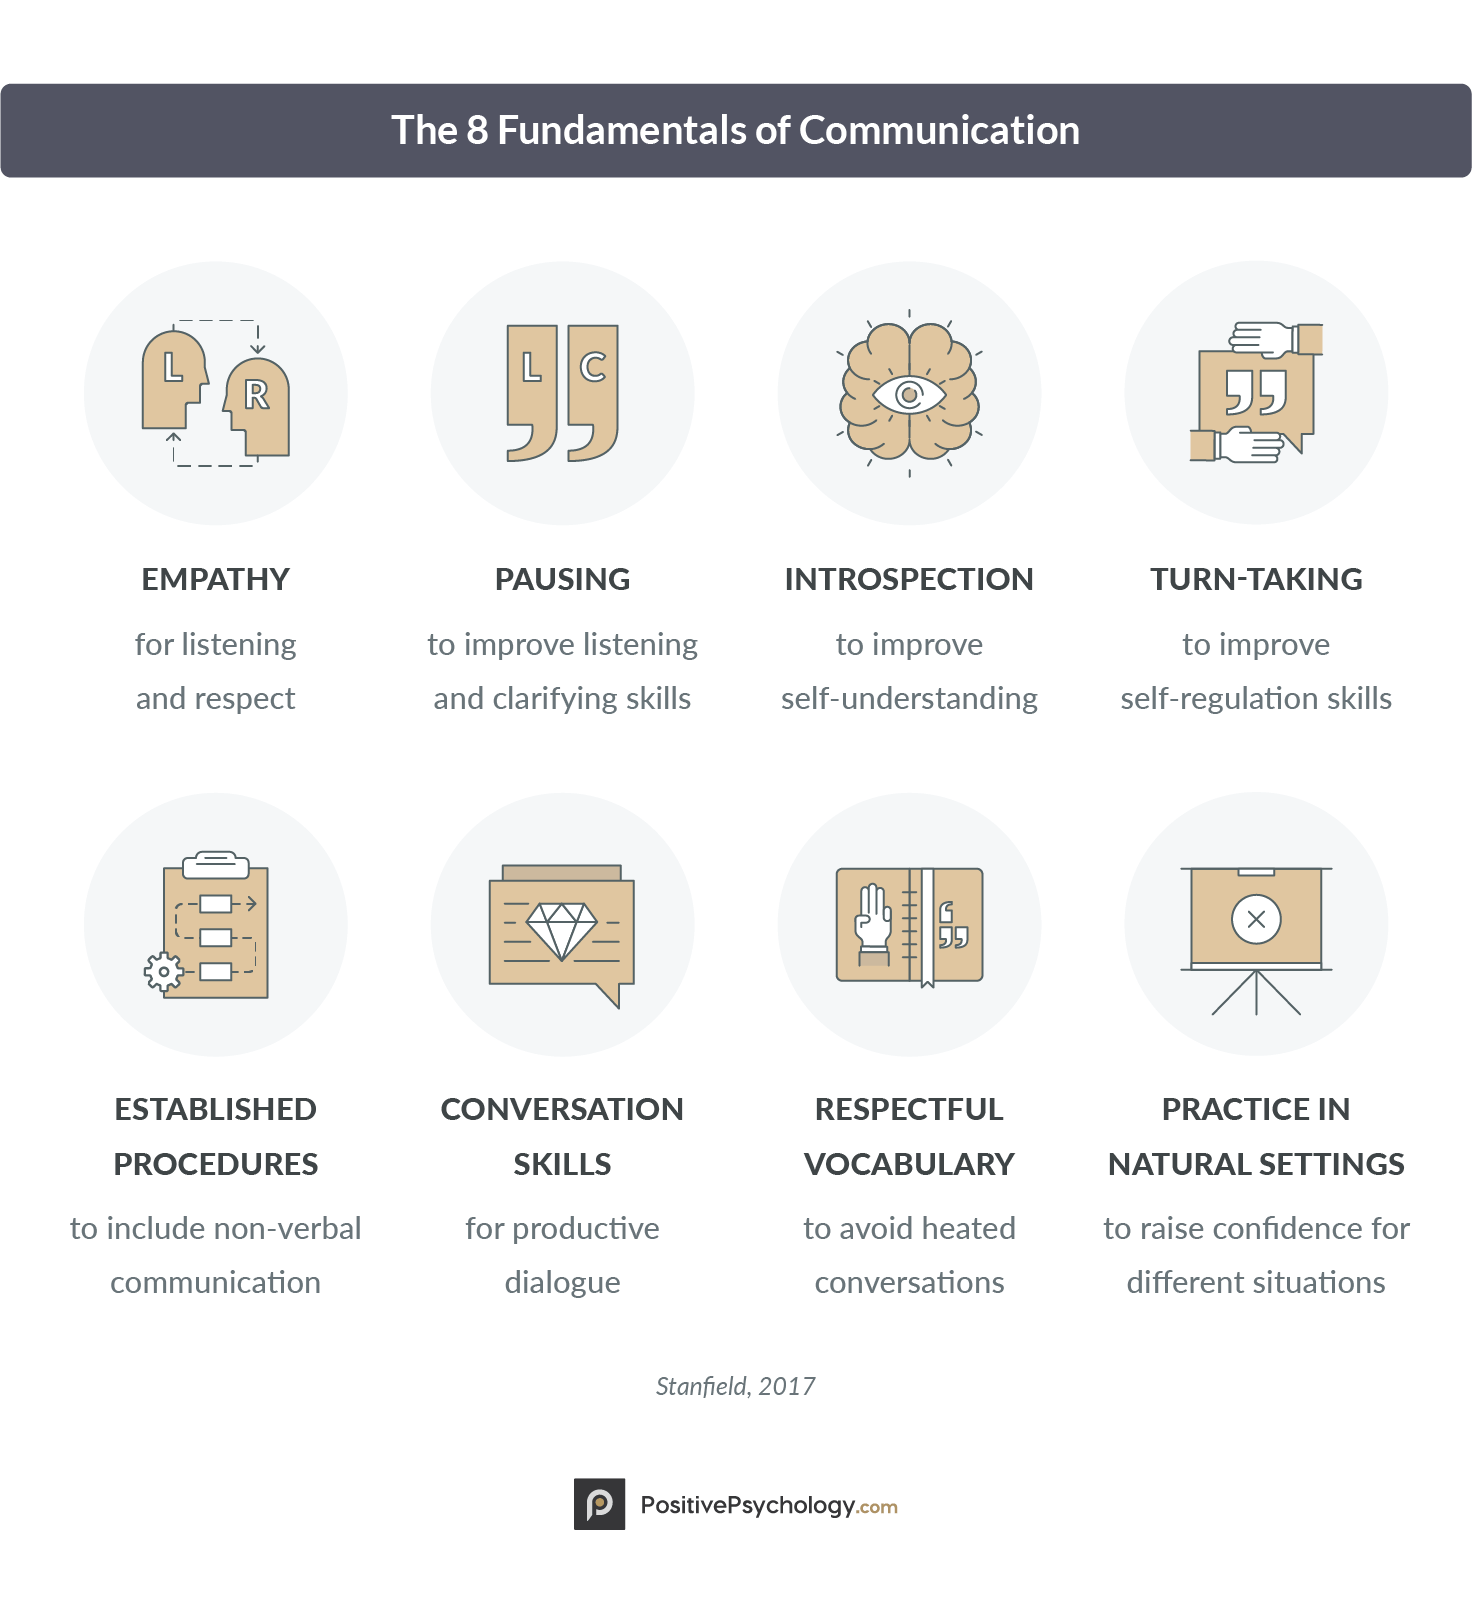 The 8 Fundamentals of Communication